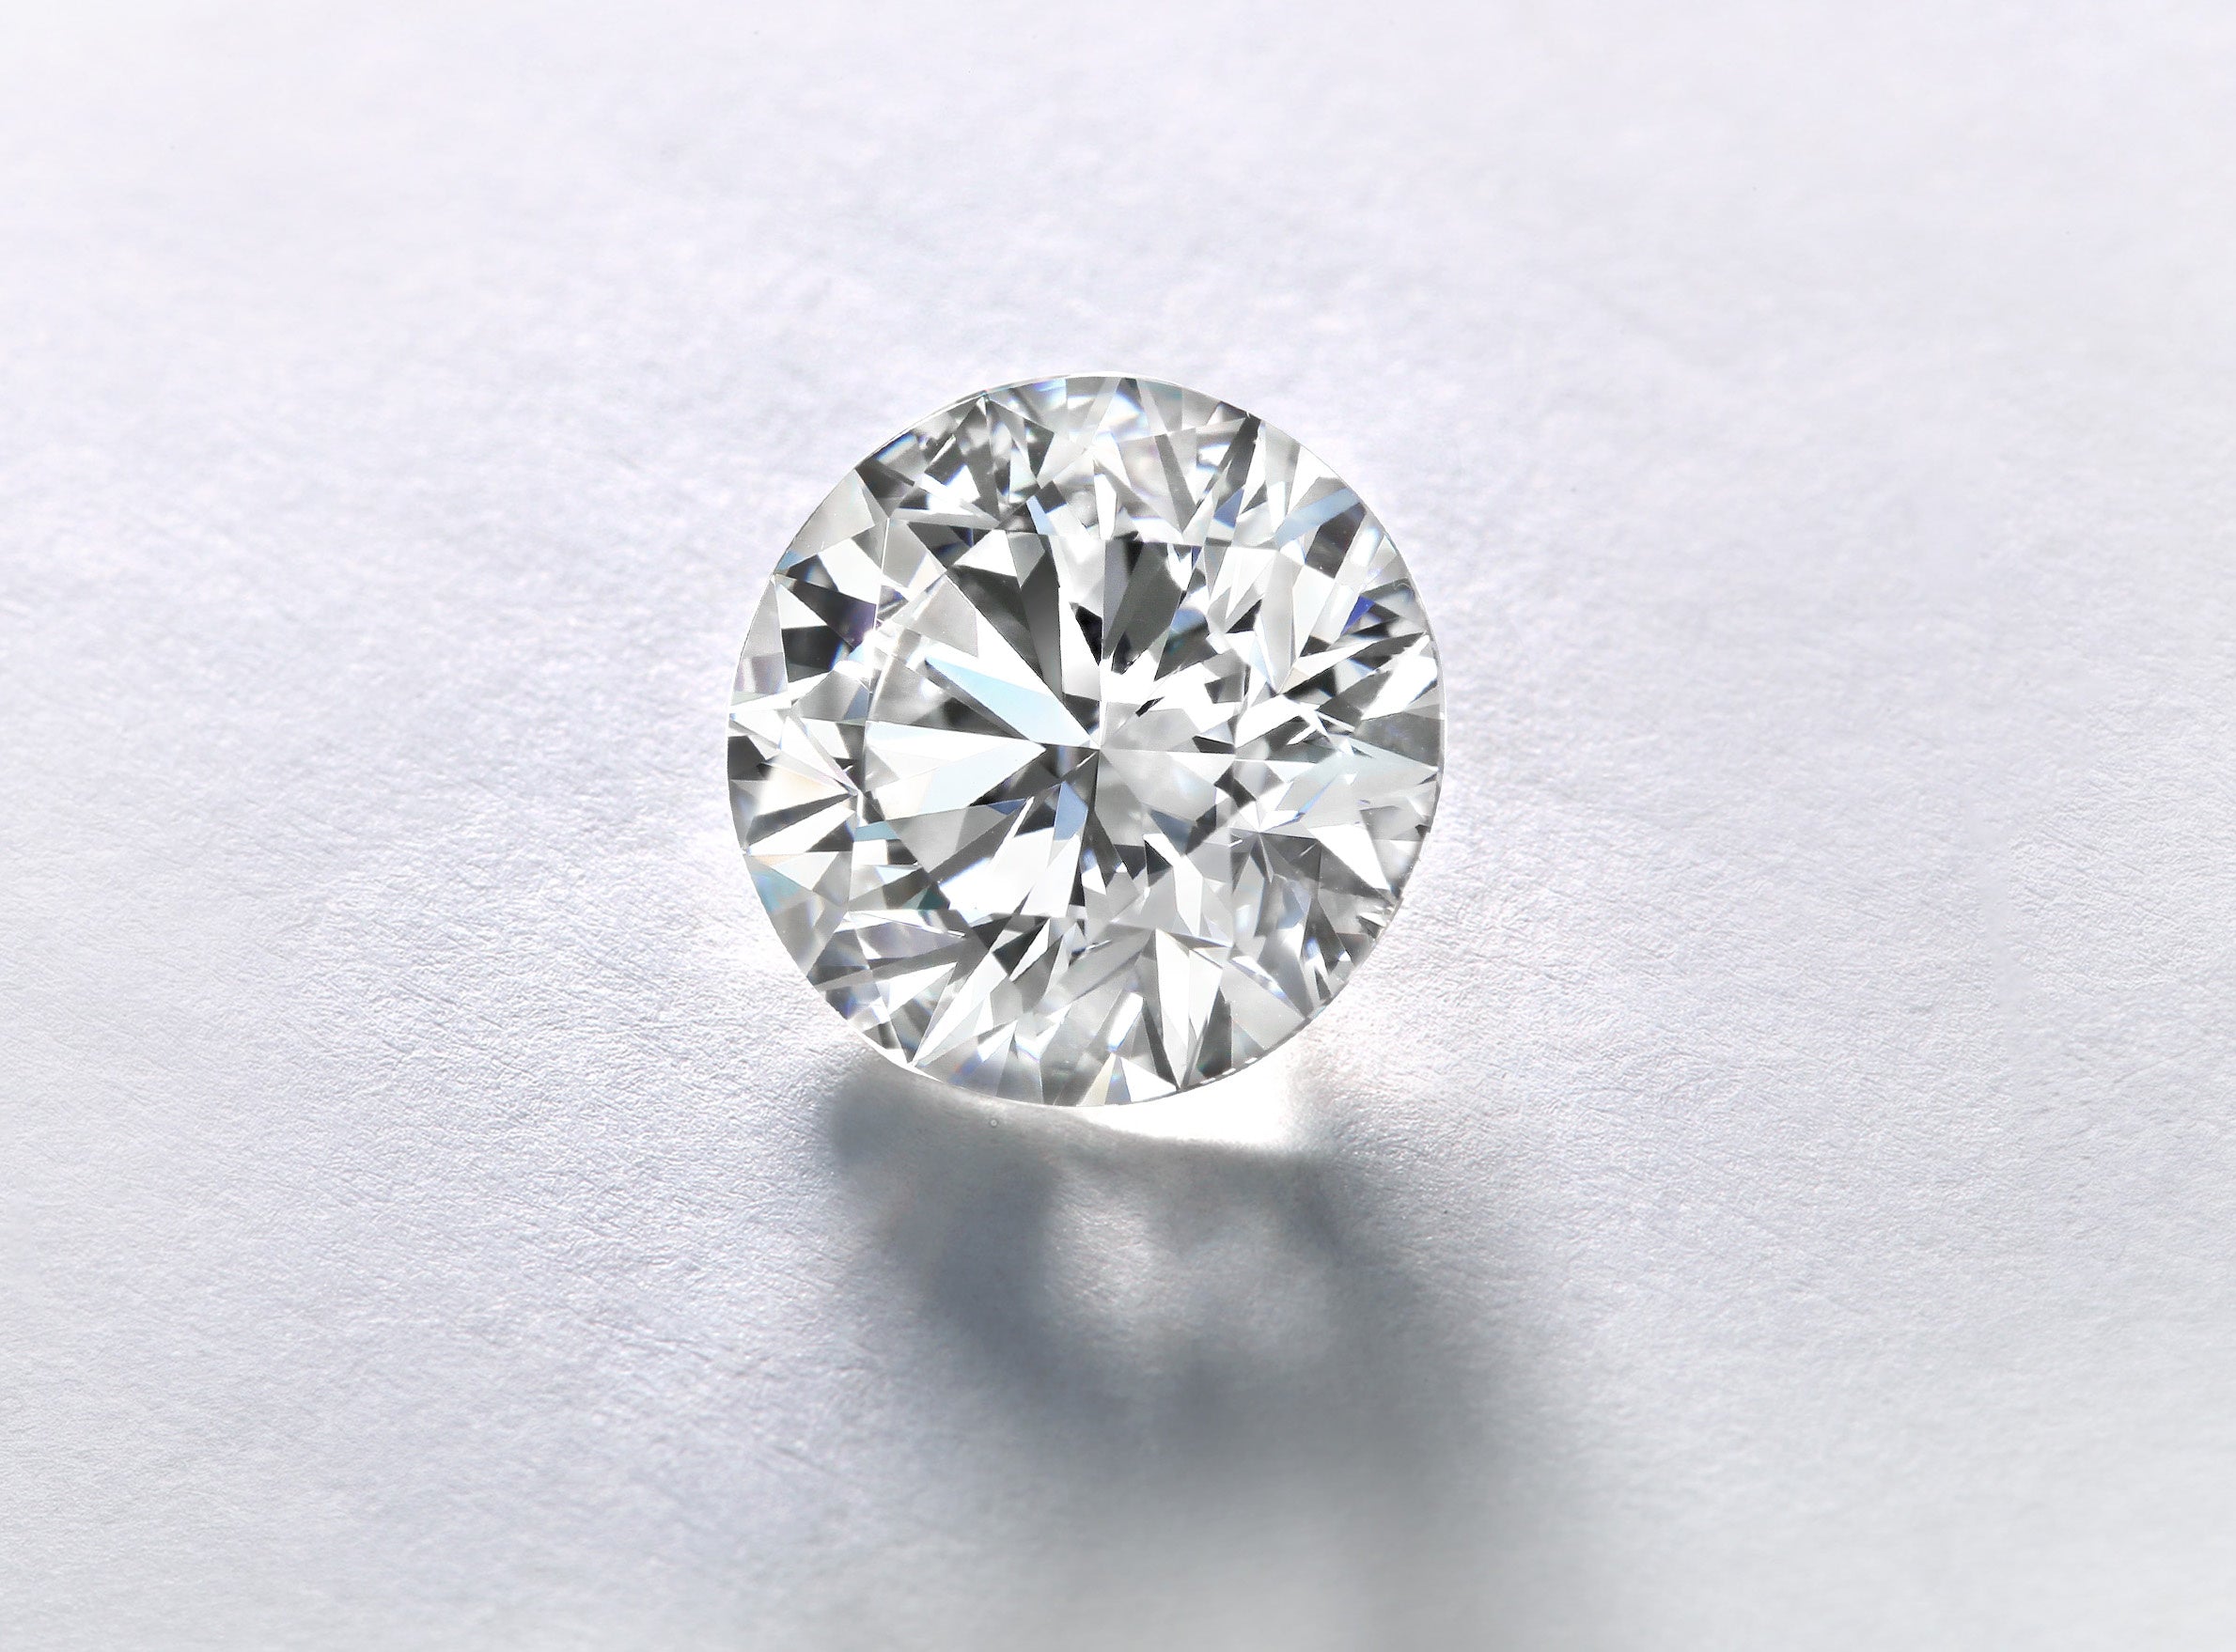 0.25ct Dcolor IF